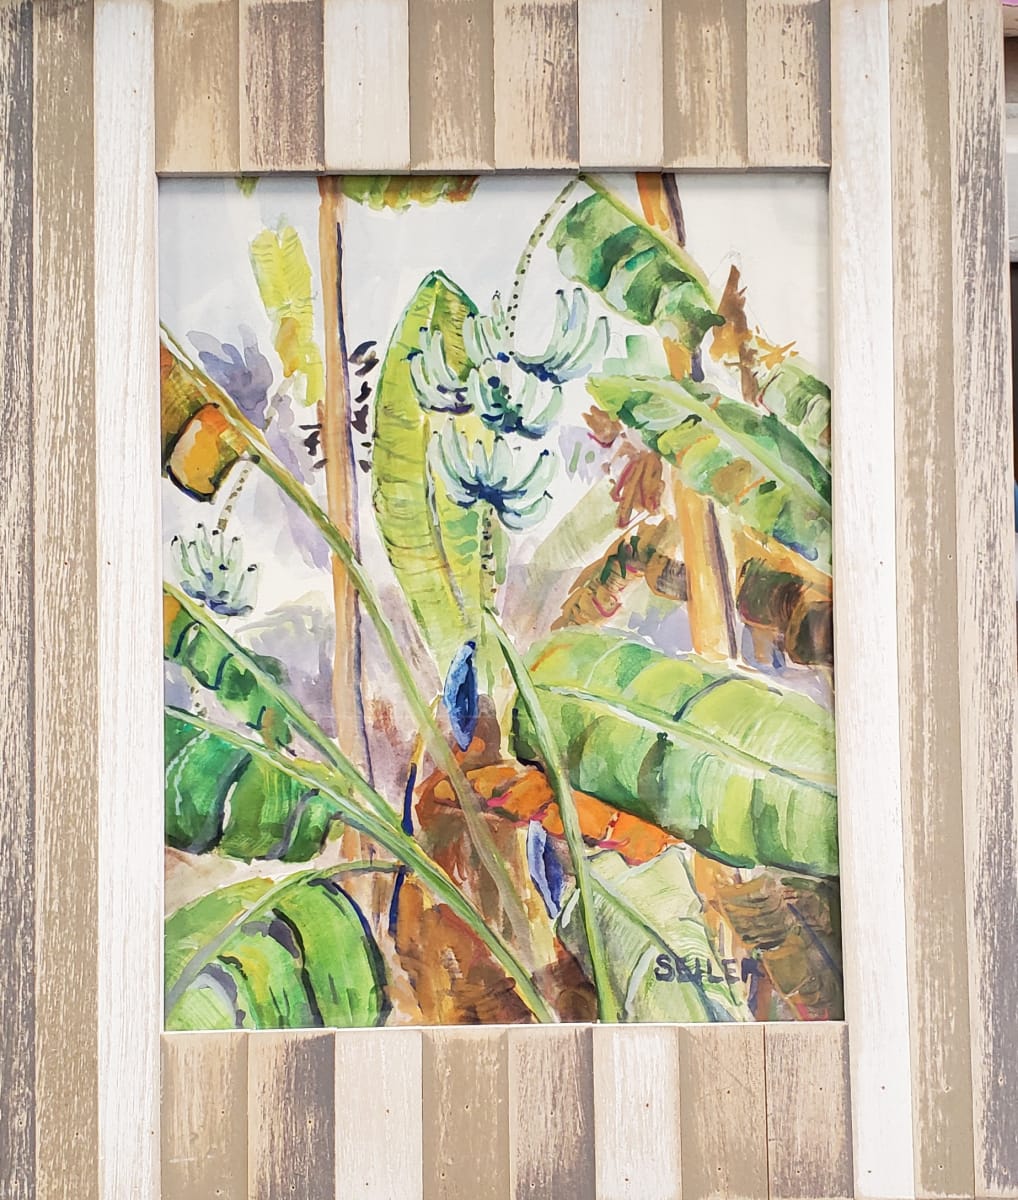 Beacon Hill Banana Belt by Jill Seiler  Image: Gouache is opaque watercolor.  I was so surprised to see bananas on these trees. 